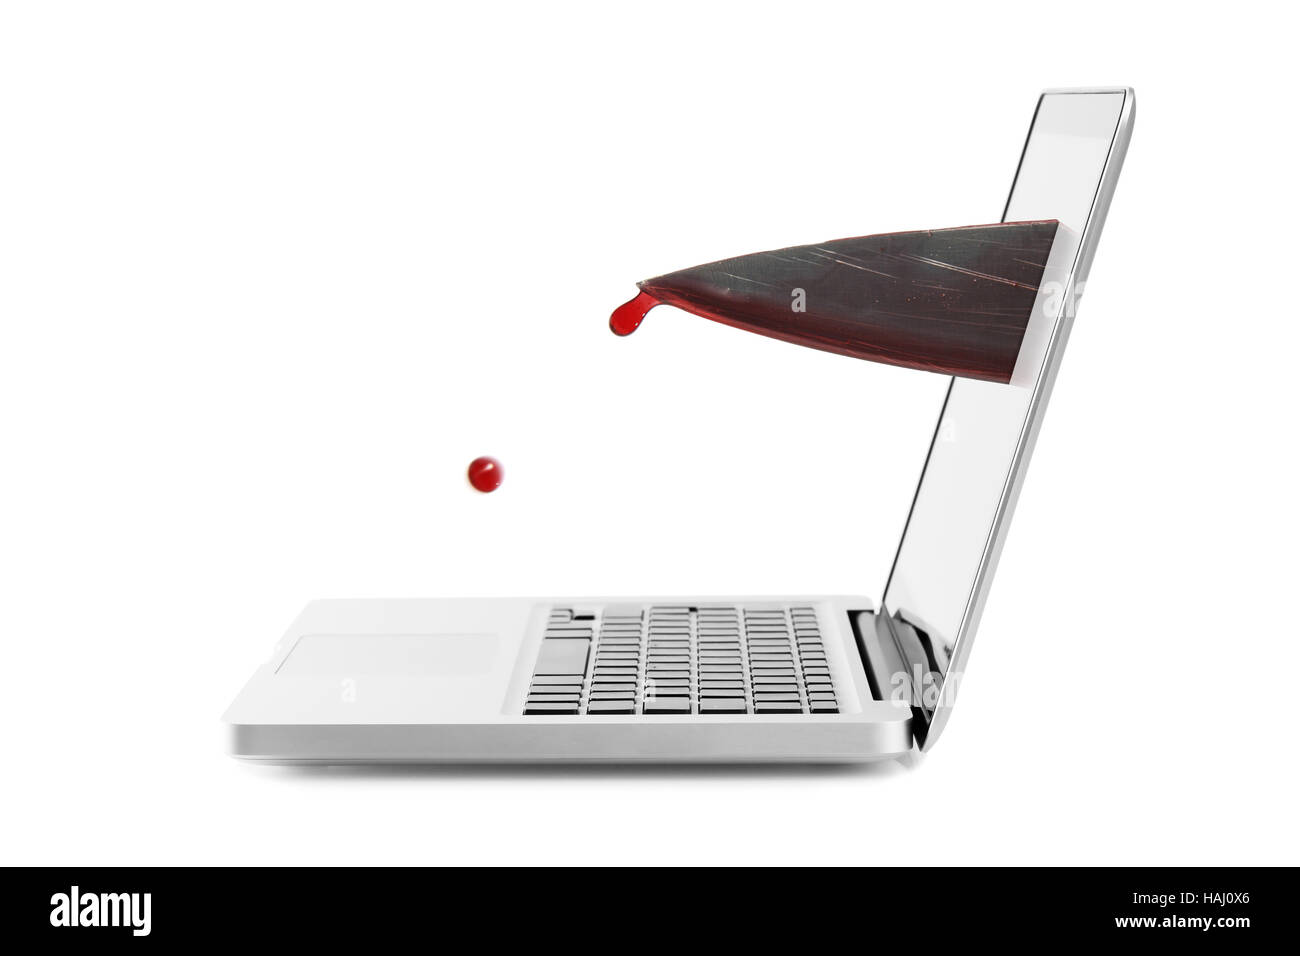 Internet violence concept - bloody knife out of laptop screen Stock Photo